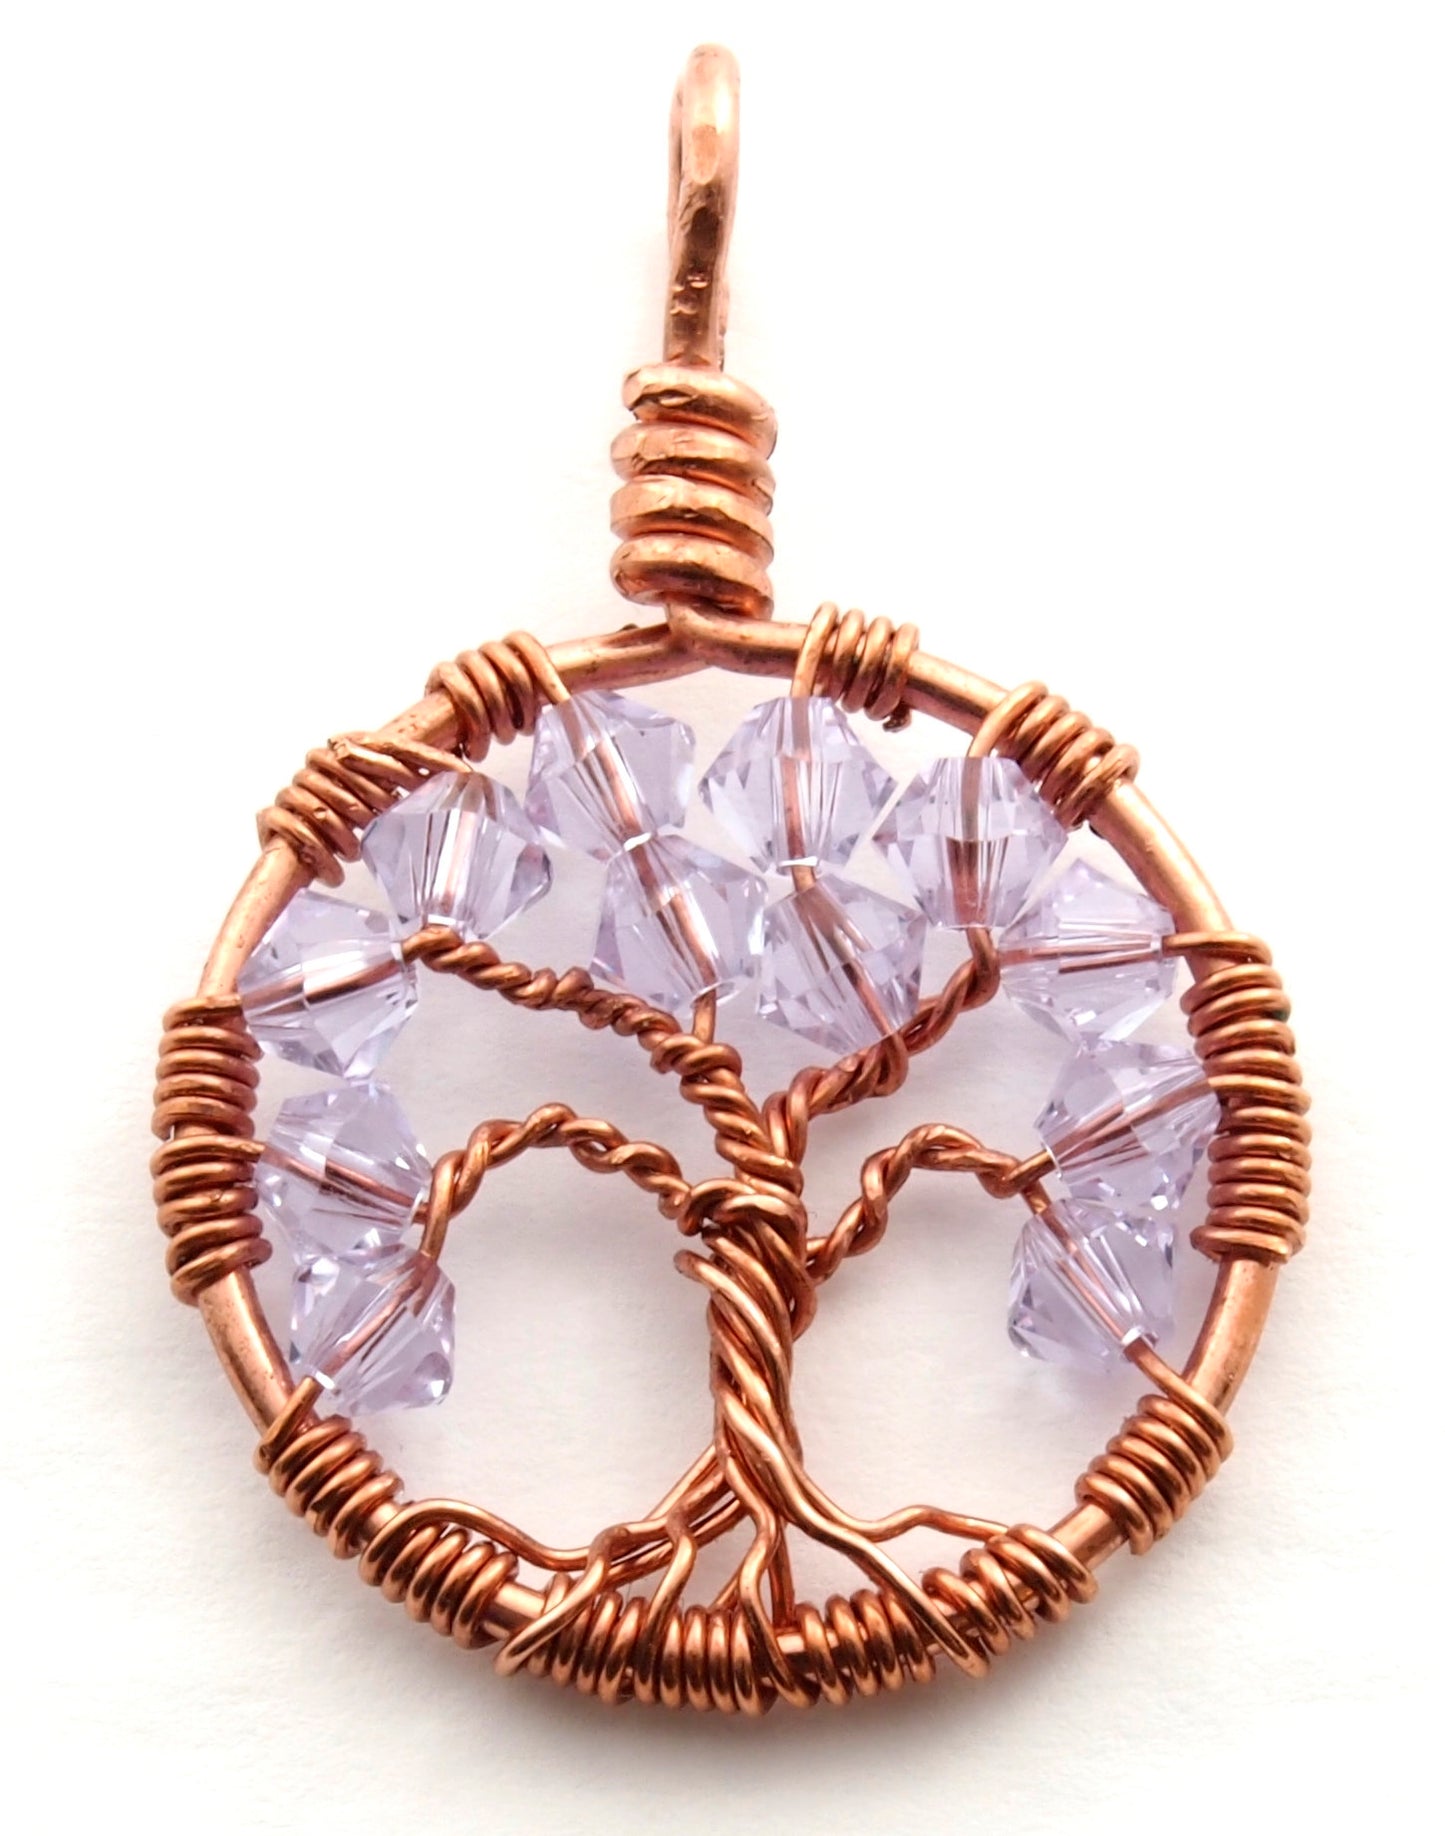 A close up image of the June birthstone tree of life pendant from Uncorked & Bottled Up made with Alexandrite Swarovski crystals and copper wire